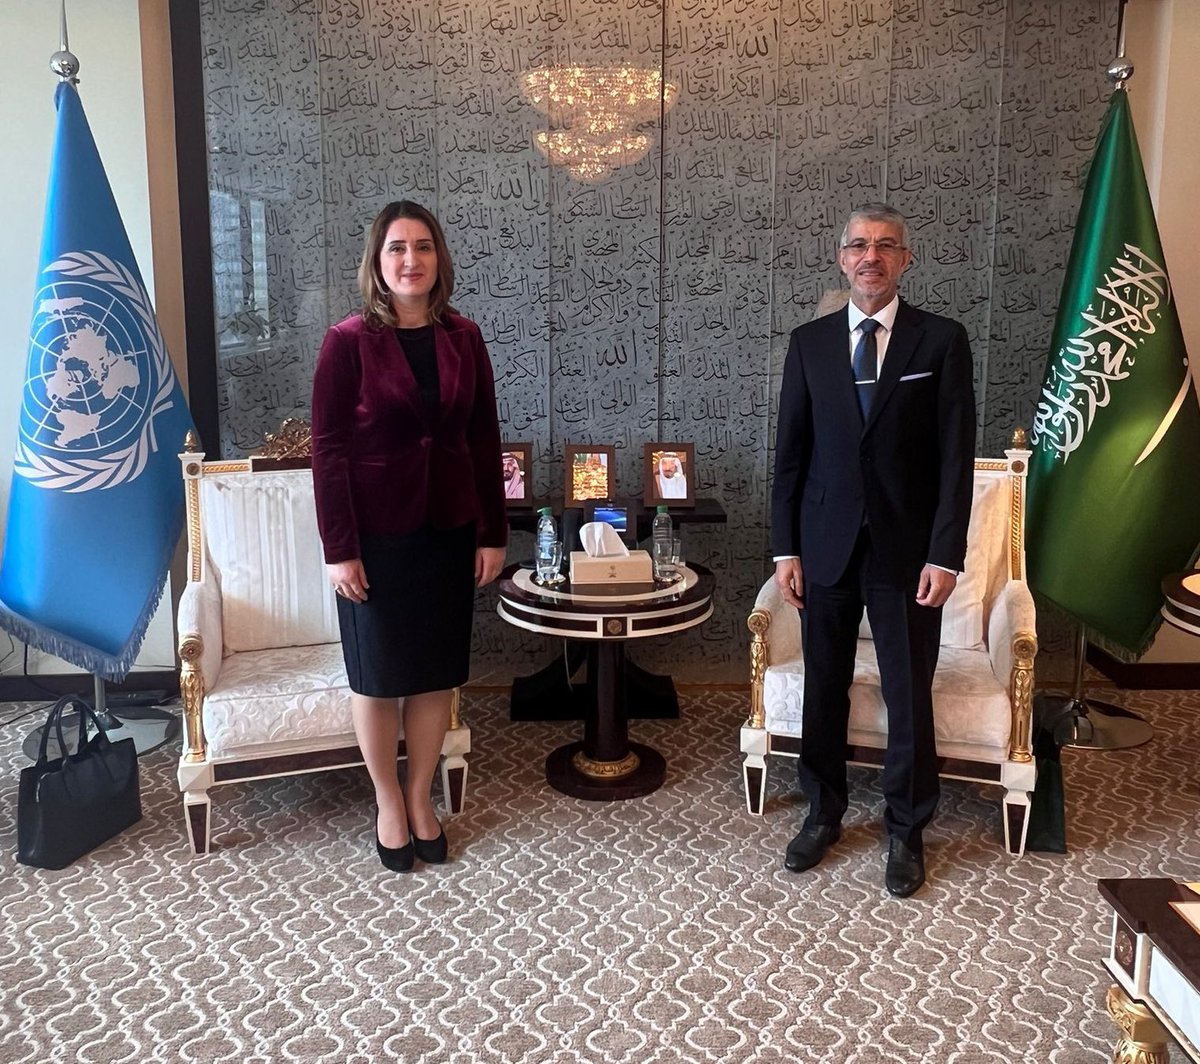 Delighted to meet with H.E. Mrs. Suela Janina, Permanent Representative of the Republic of Albania to the #UN. We had the opportunity to discuss methods to further cooperation between @ksamissionun & @AlMissionUN. Looking forward to continued collaboration.